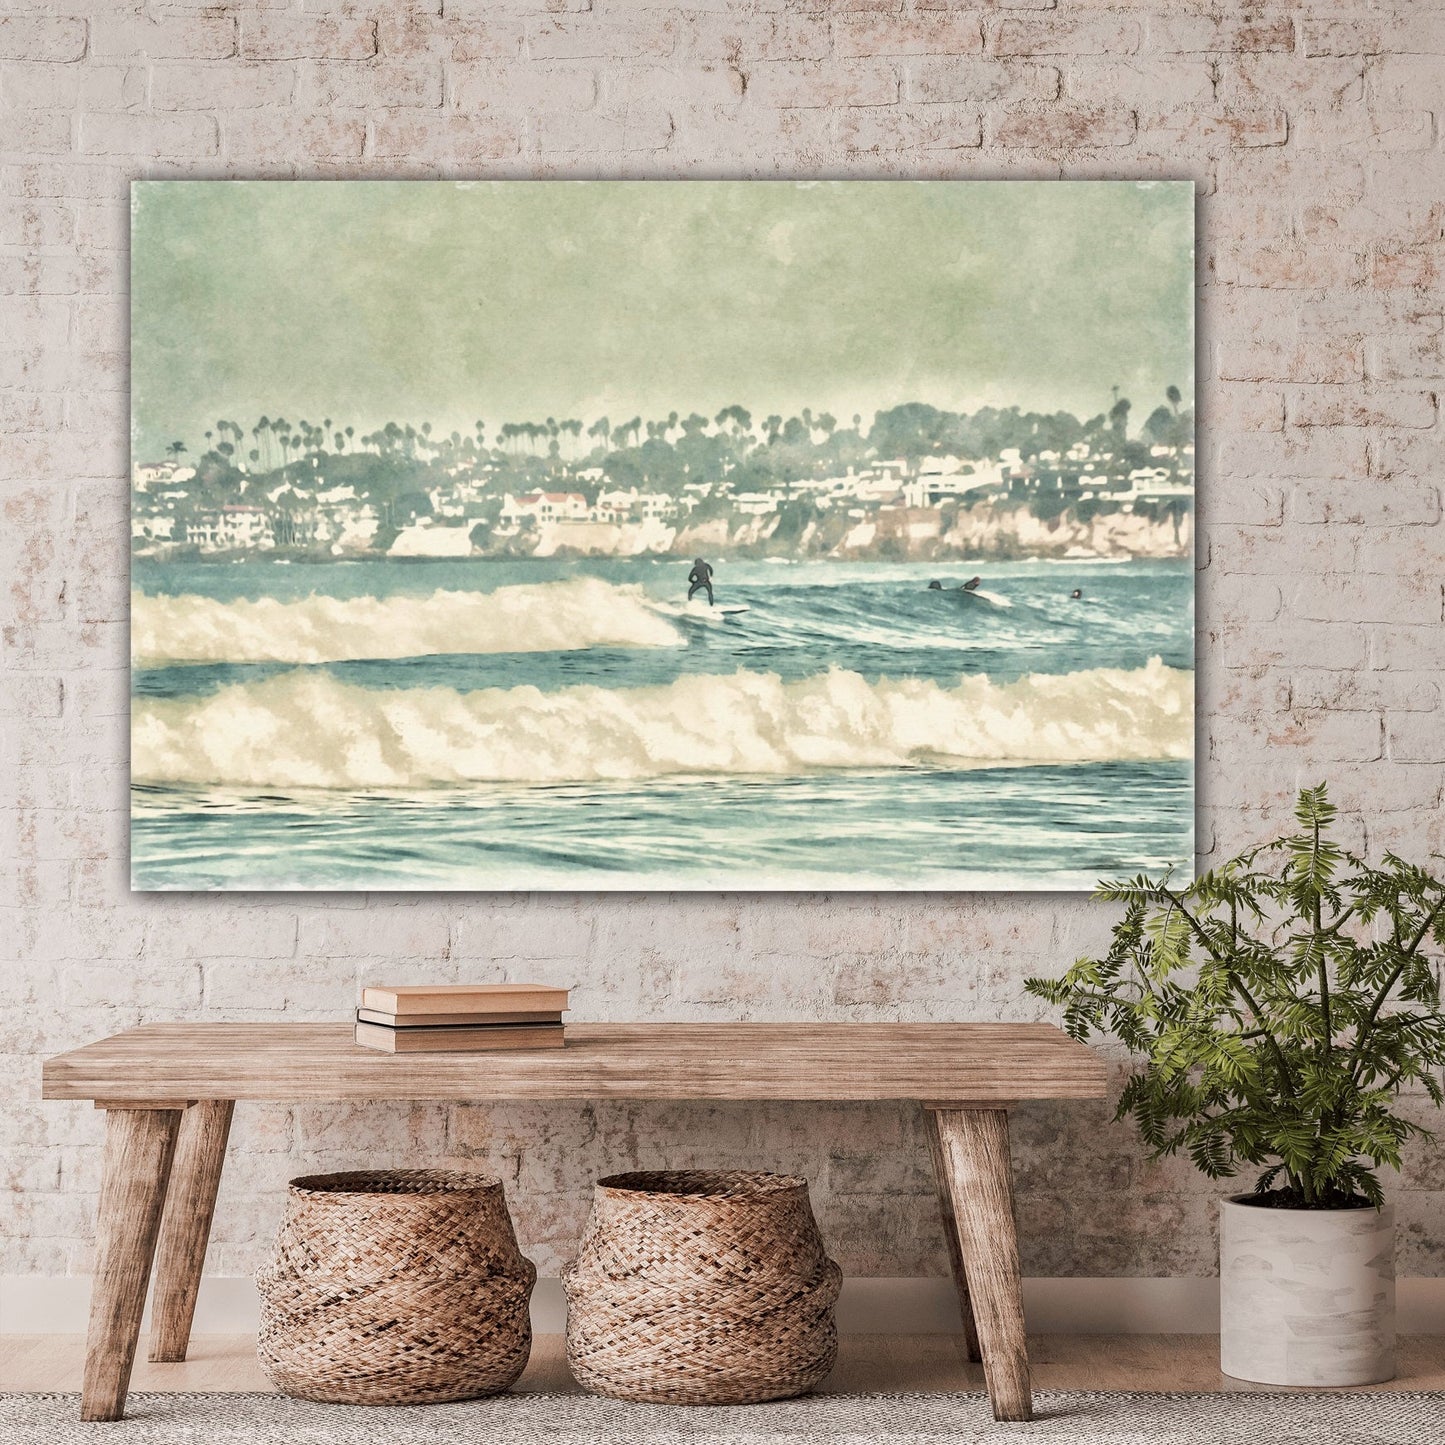 surfing the waves canvas print home decor by Jacqueline MB Designs